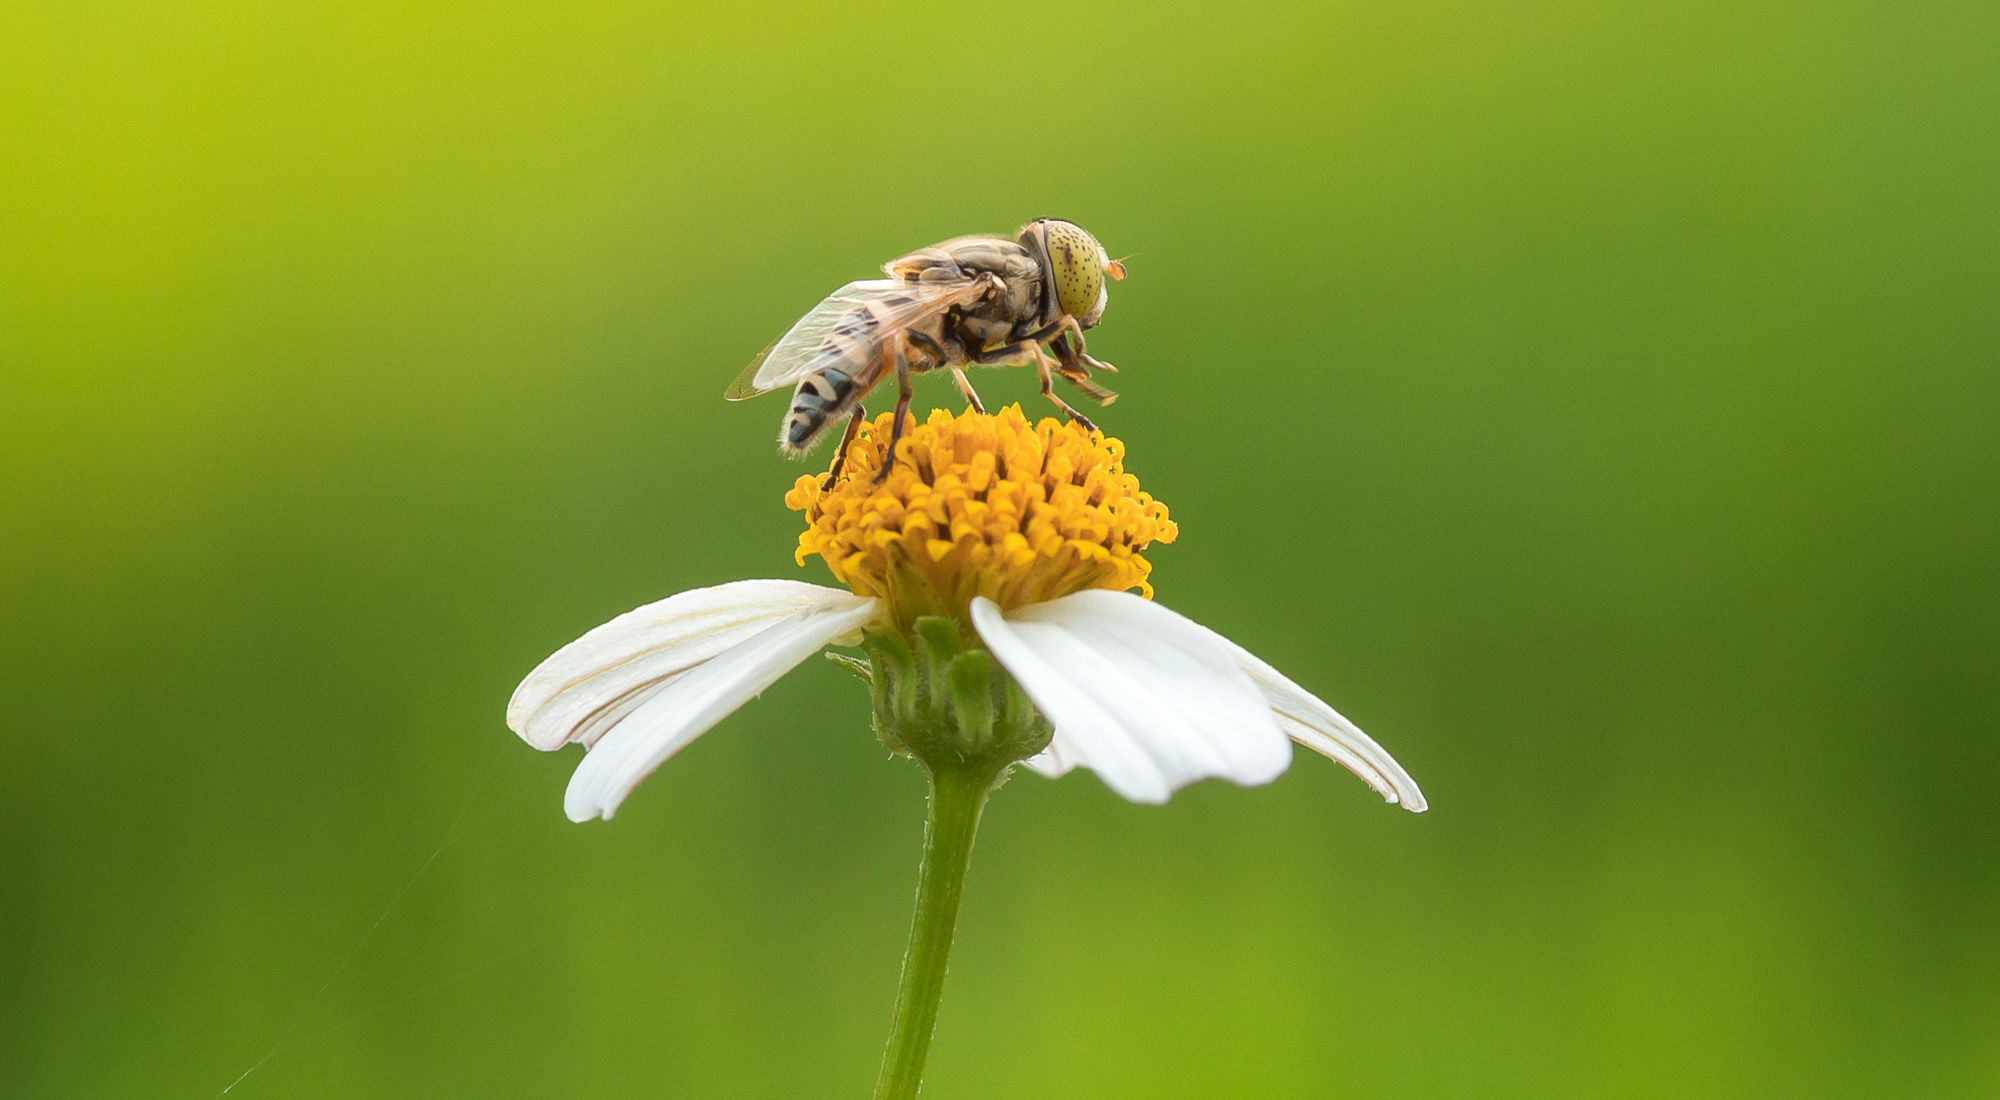 Meet our Hoverfly Experts – Interview with Zorica Nedeljkovic